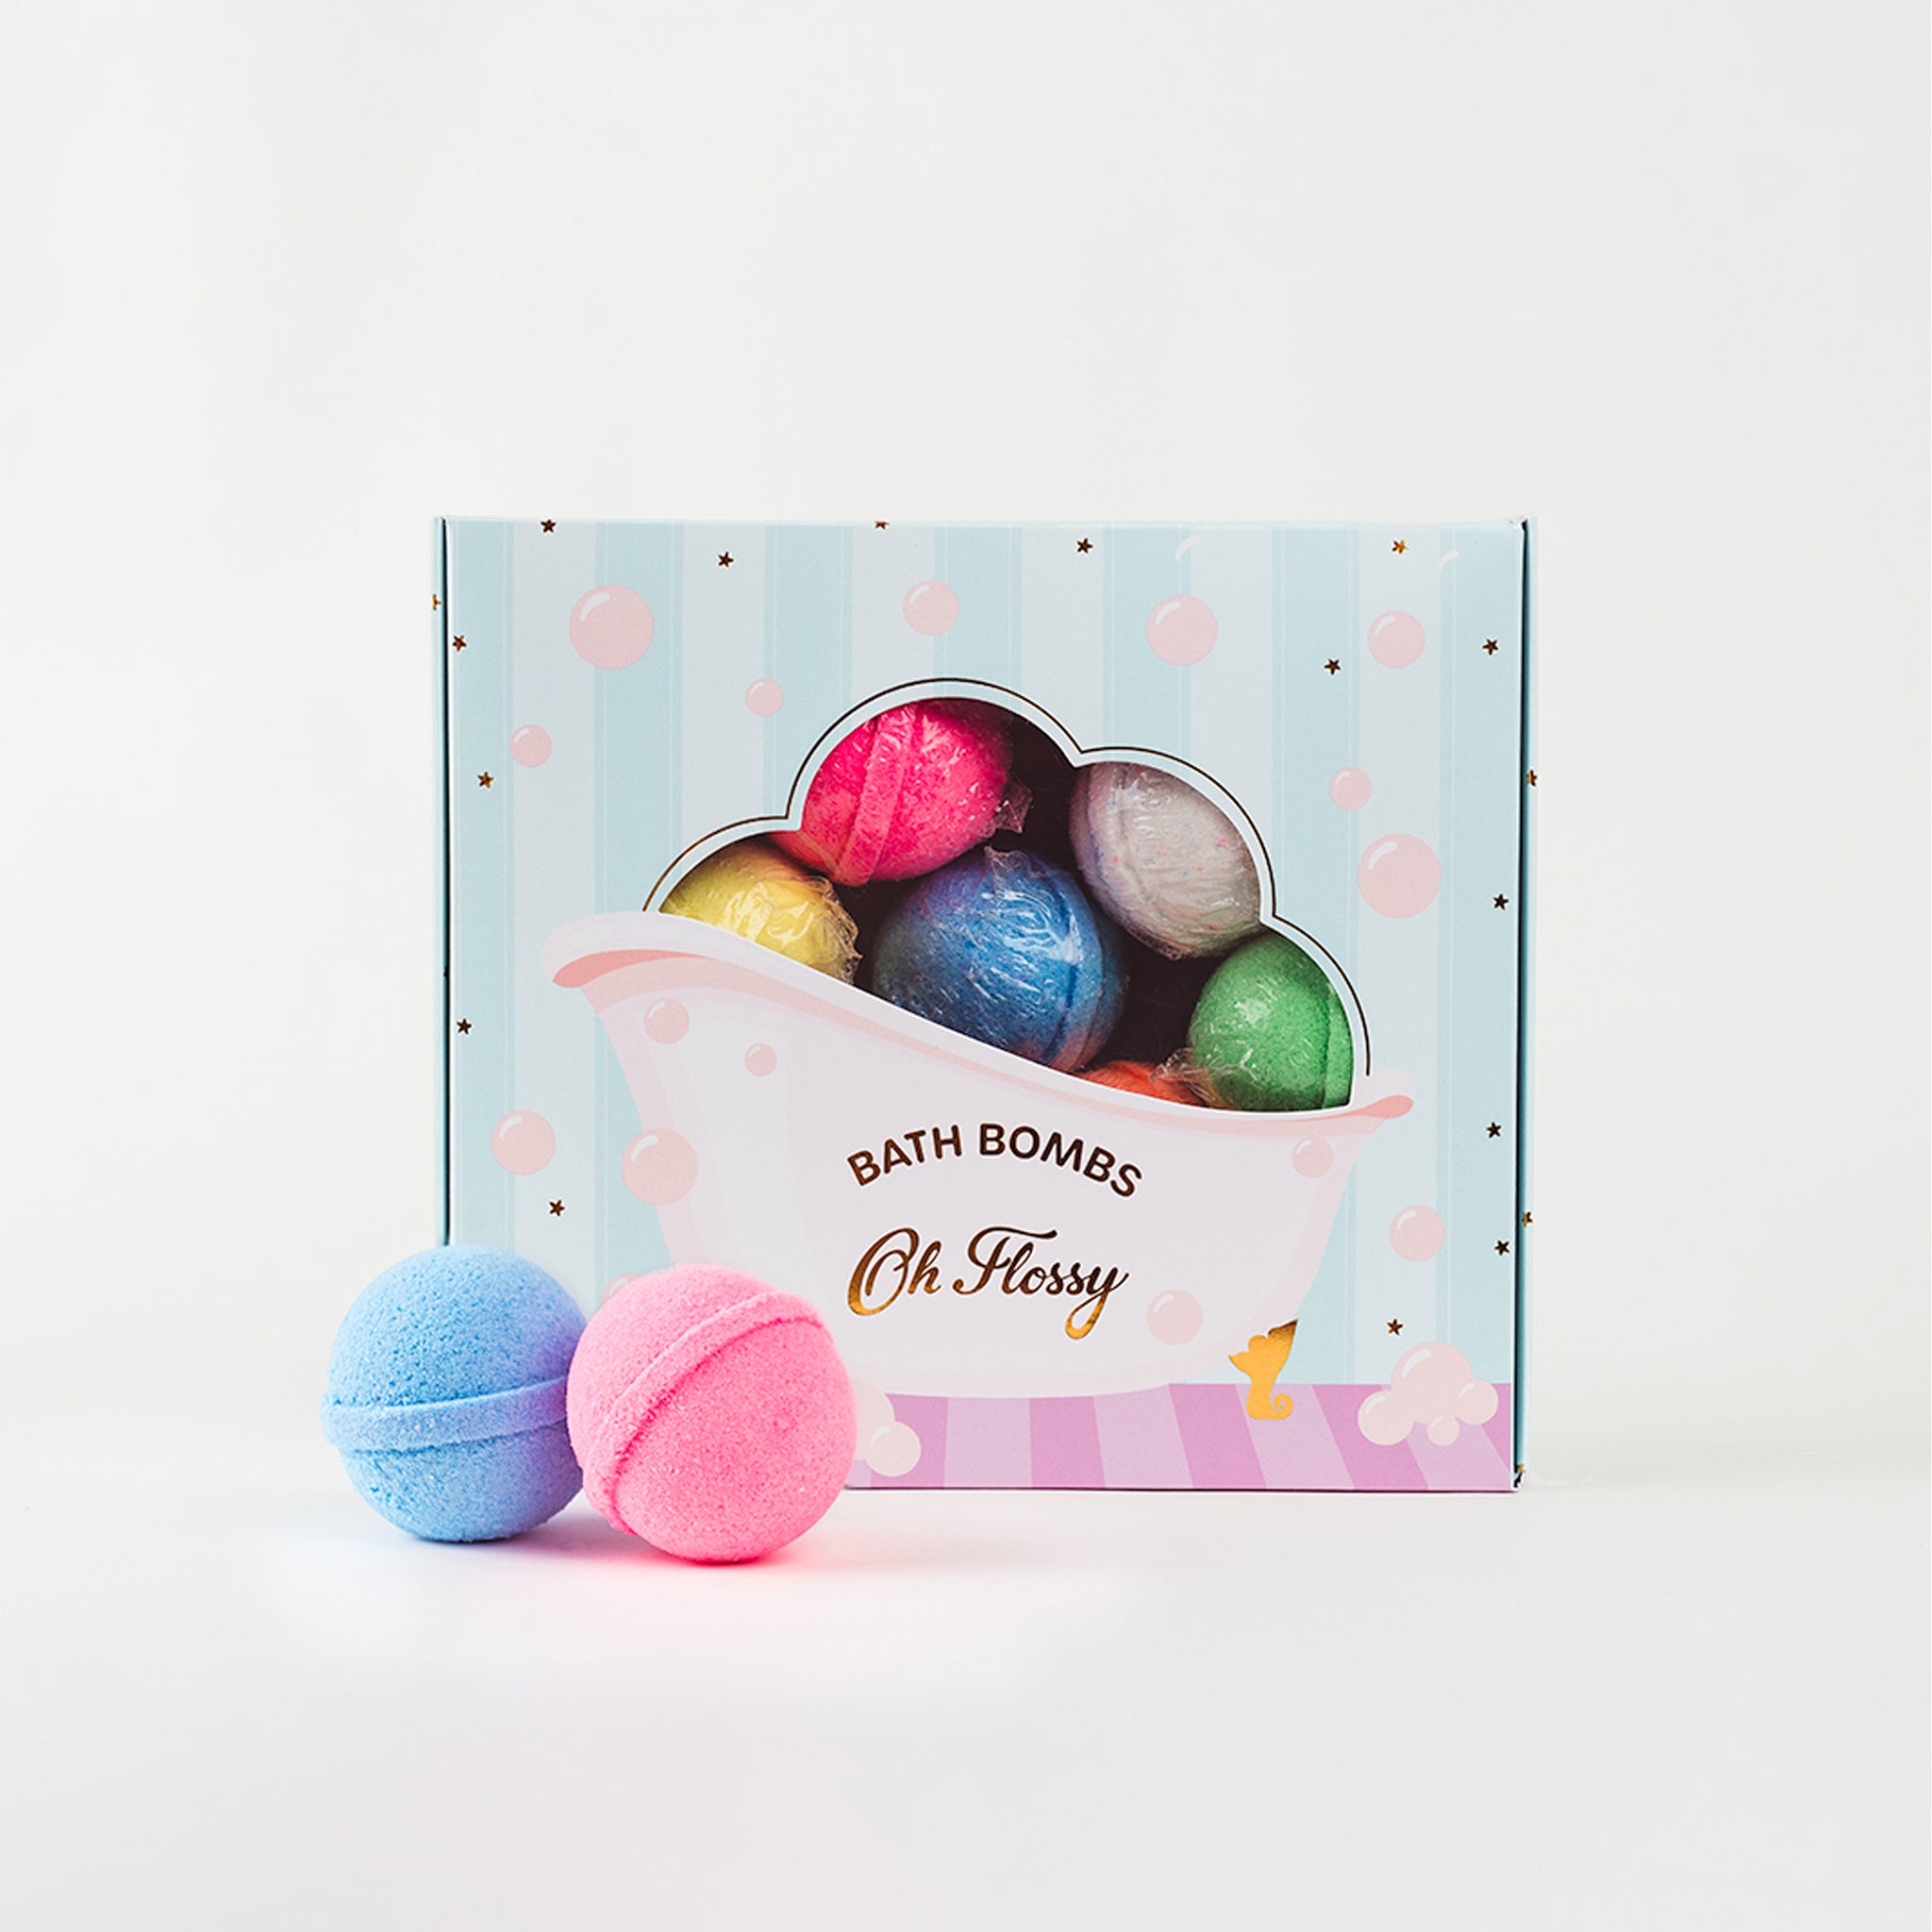    Oh-Flossy-Kids-Natural-Makeup-Multi-colour-bath-bombs-box-front